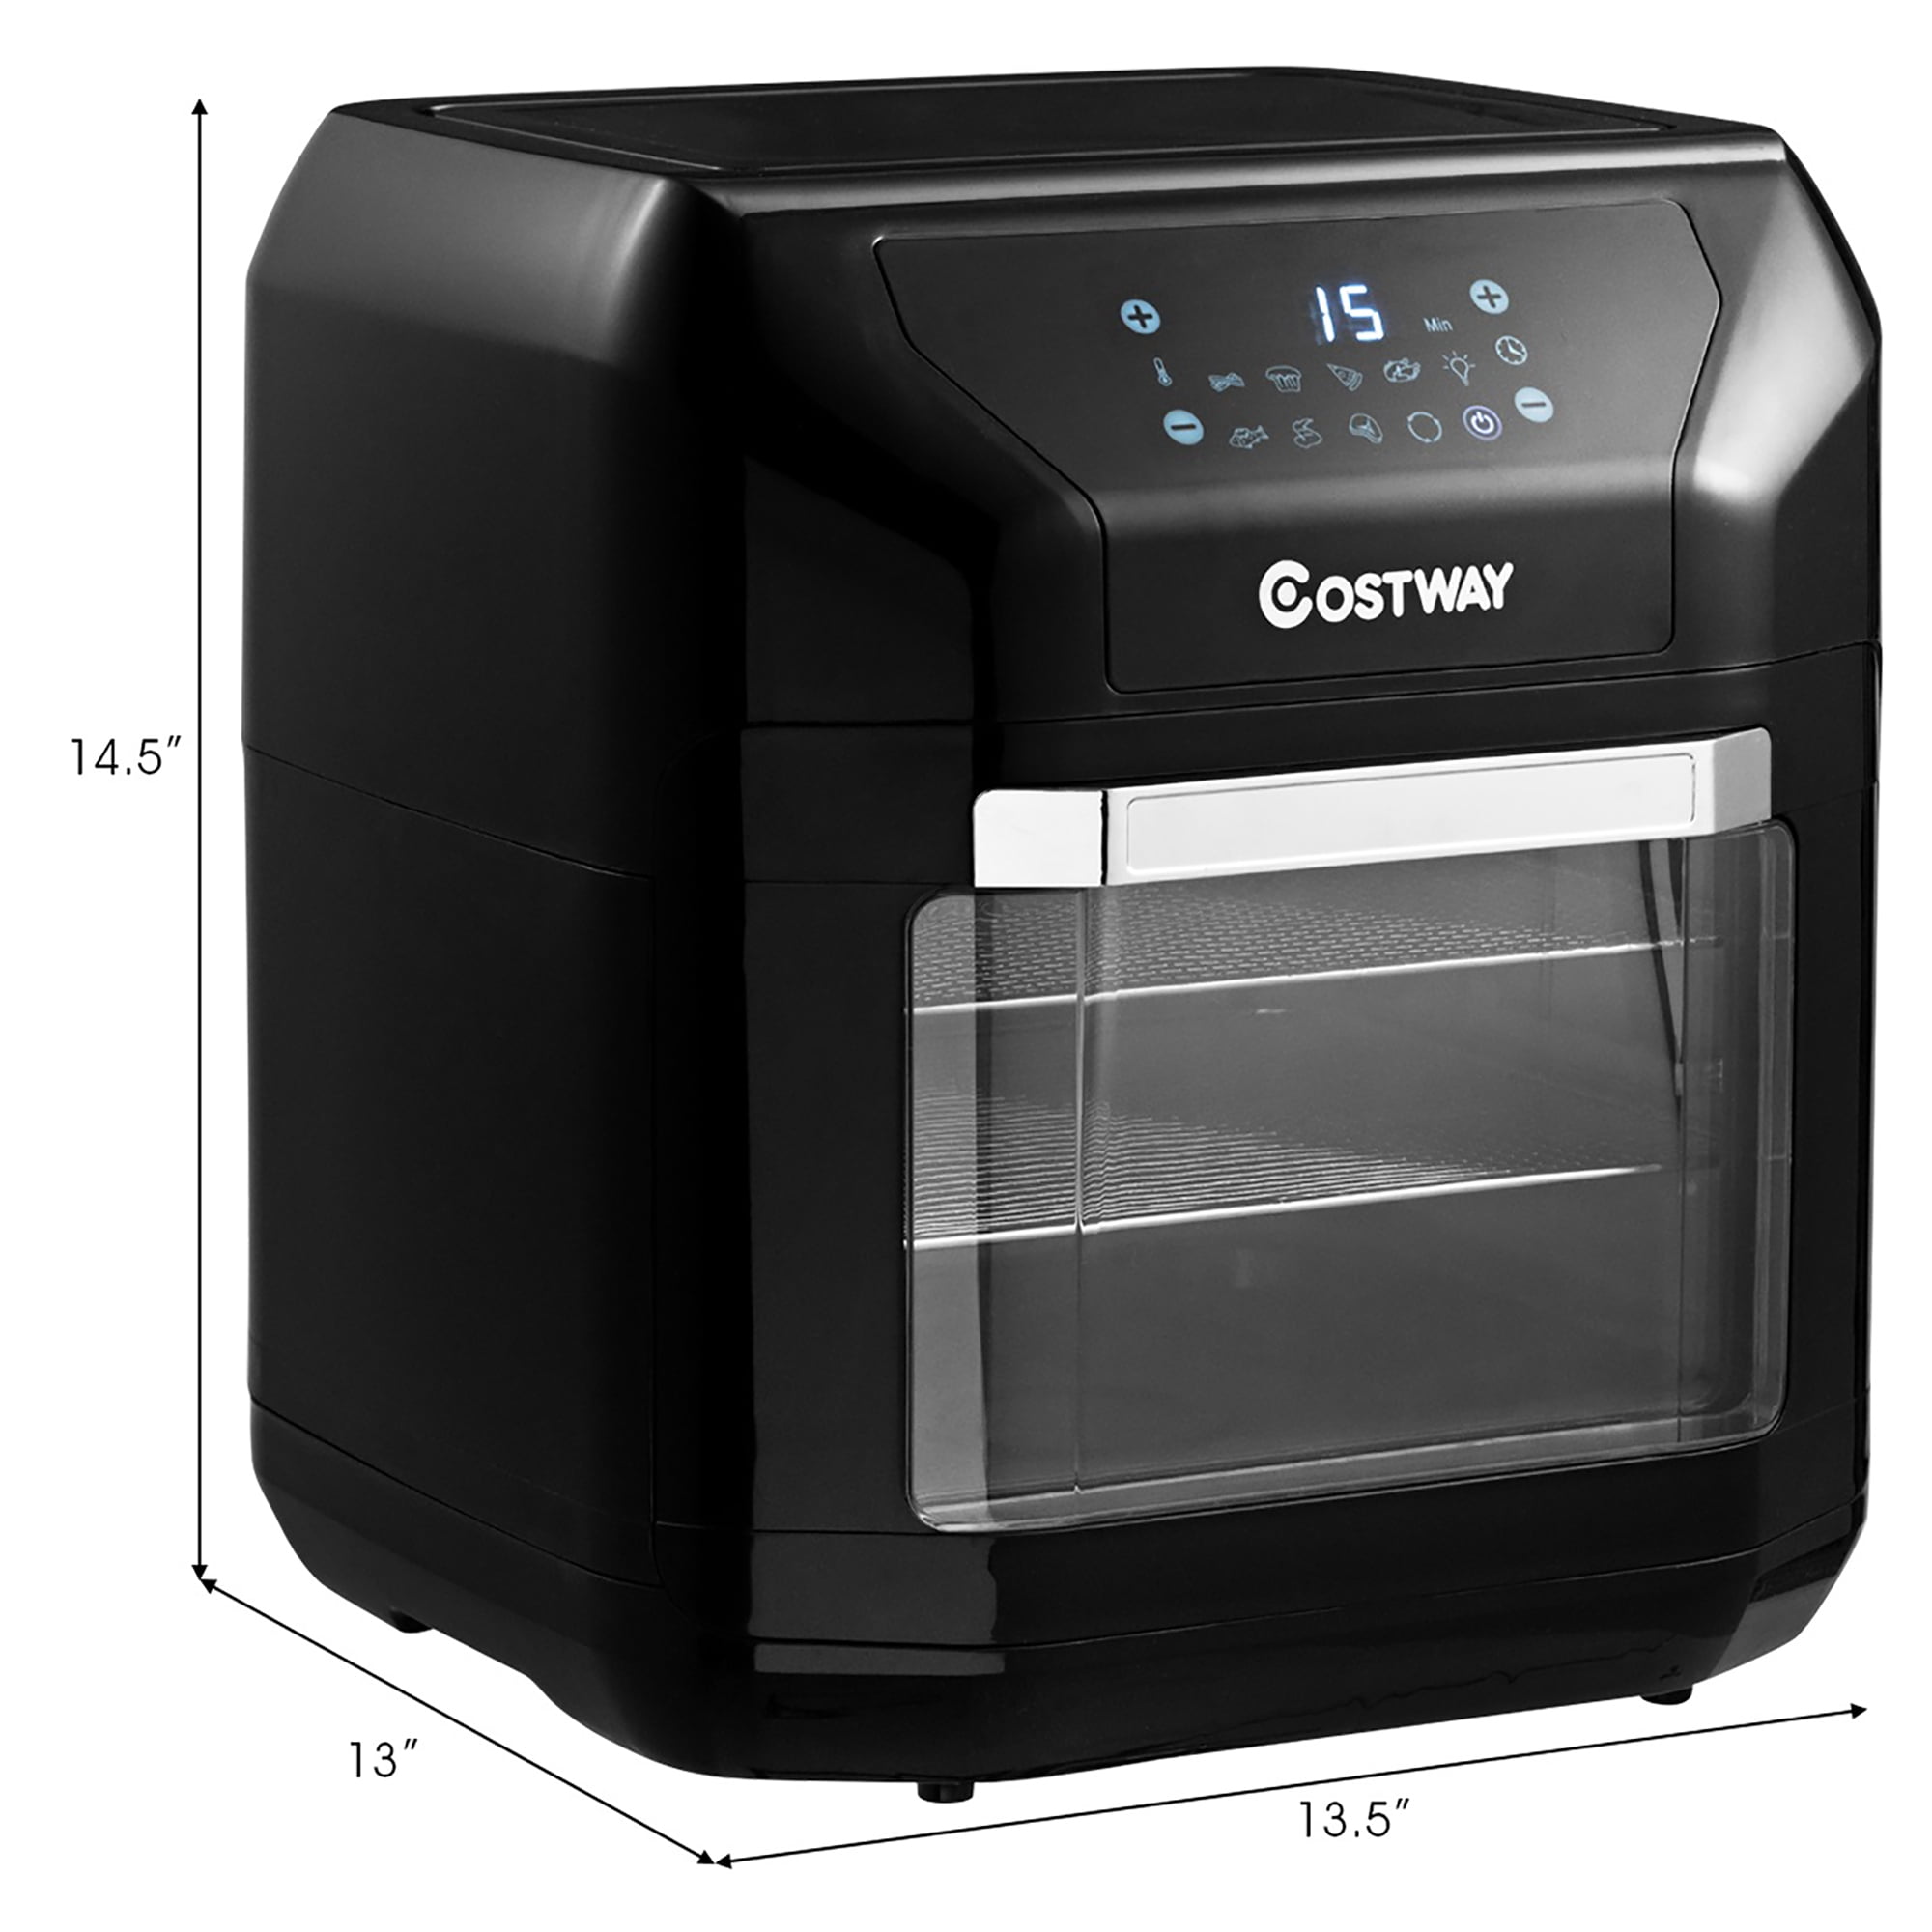 Costway 16-in-1 Air Fryer Oven 15.5 QT Toaster Oven Dehydrator - On Sale -  Bed Bath & Beyond - 32307790